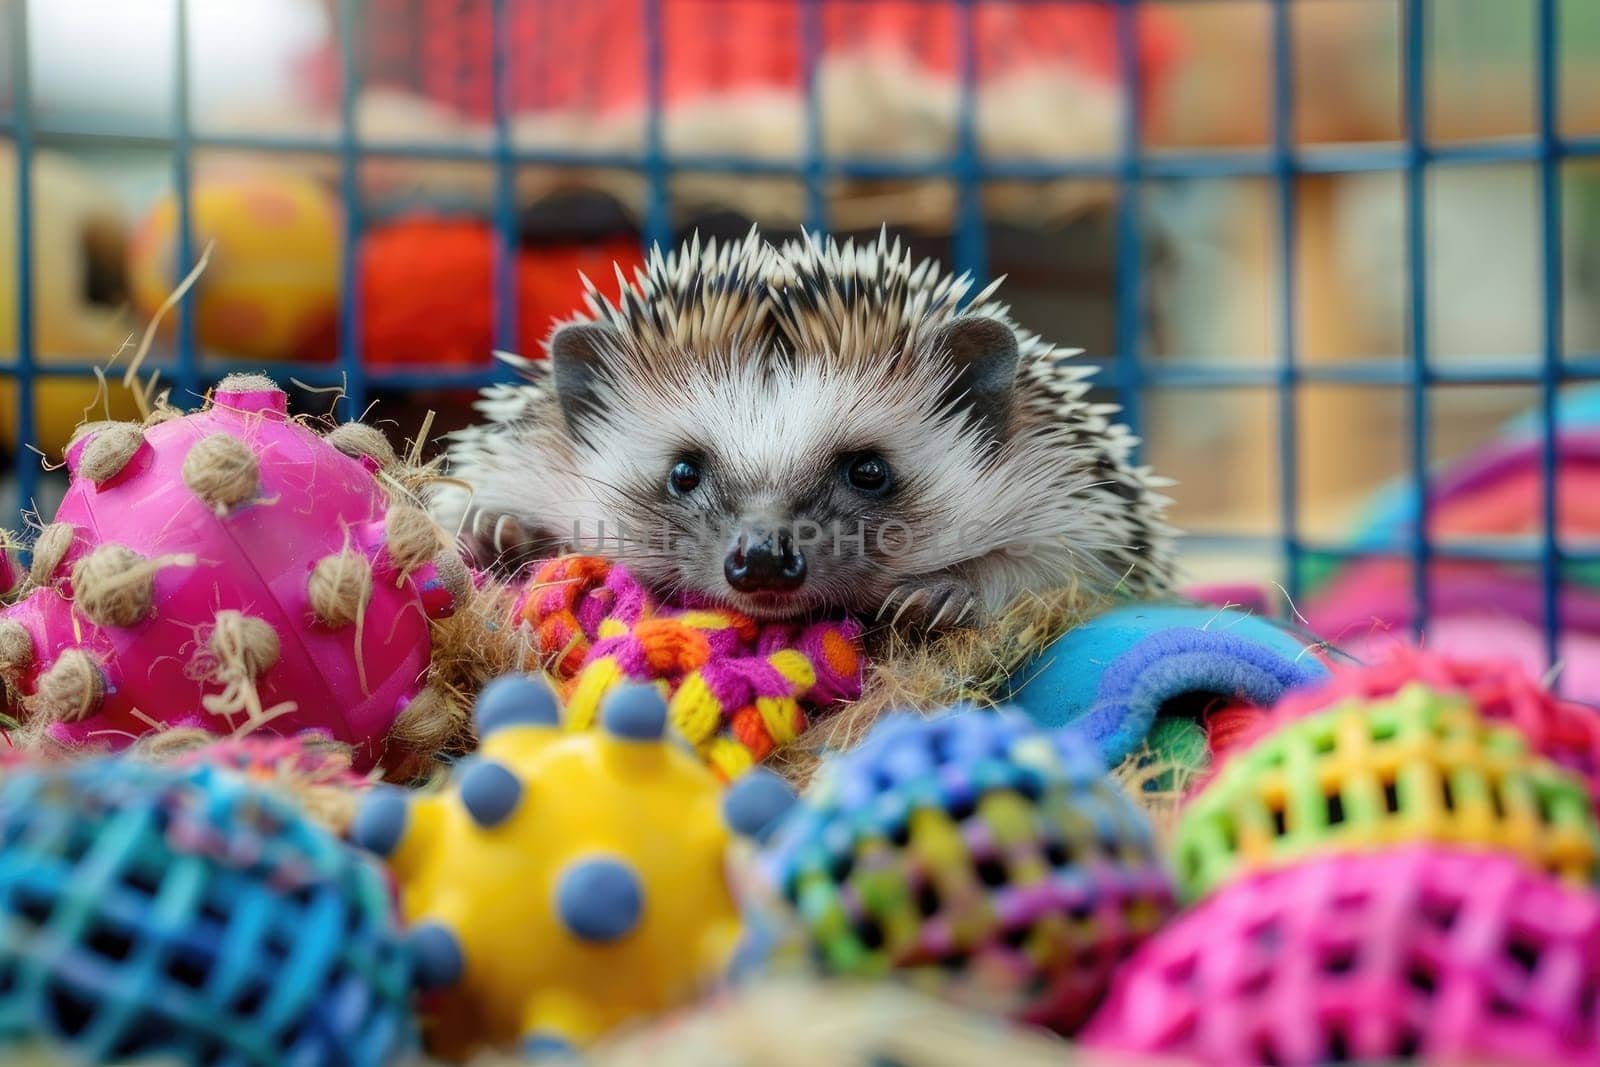 A happy hedgehog uncurled and exploring its playpen, filled with colorful toys and. by Chawagen